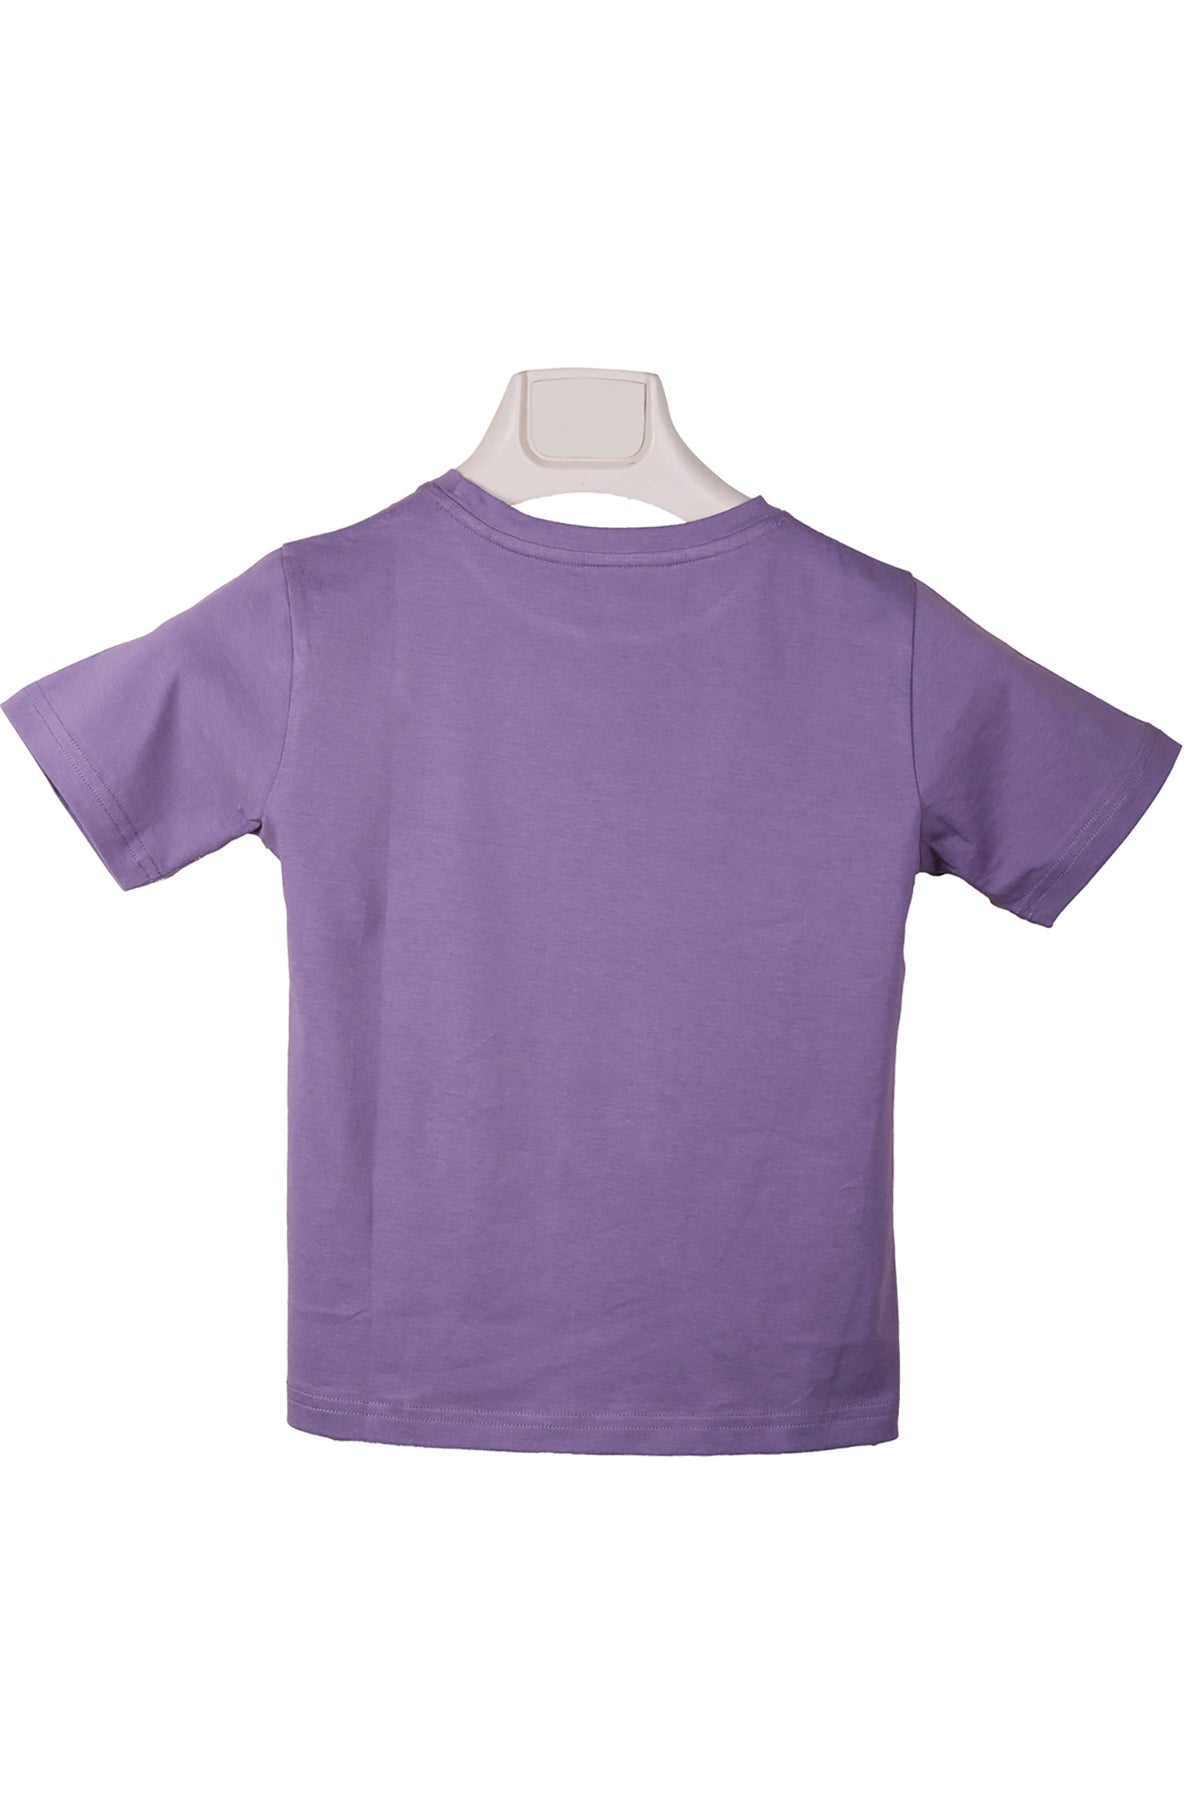 Be Kind To Every Kind Purple T-Shirt For Girls